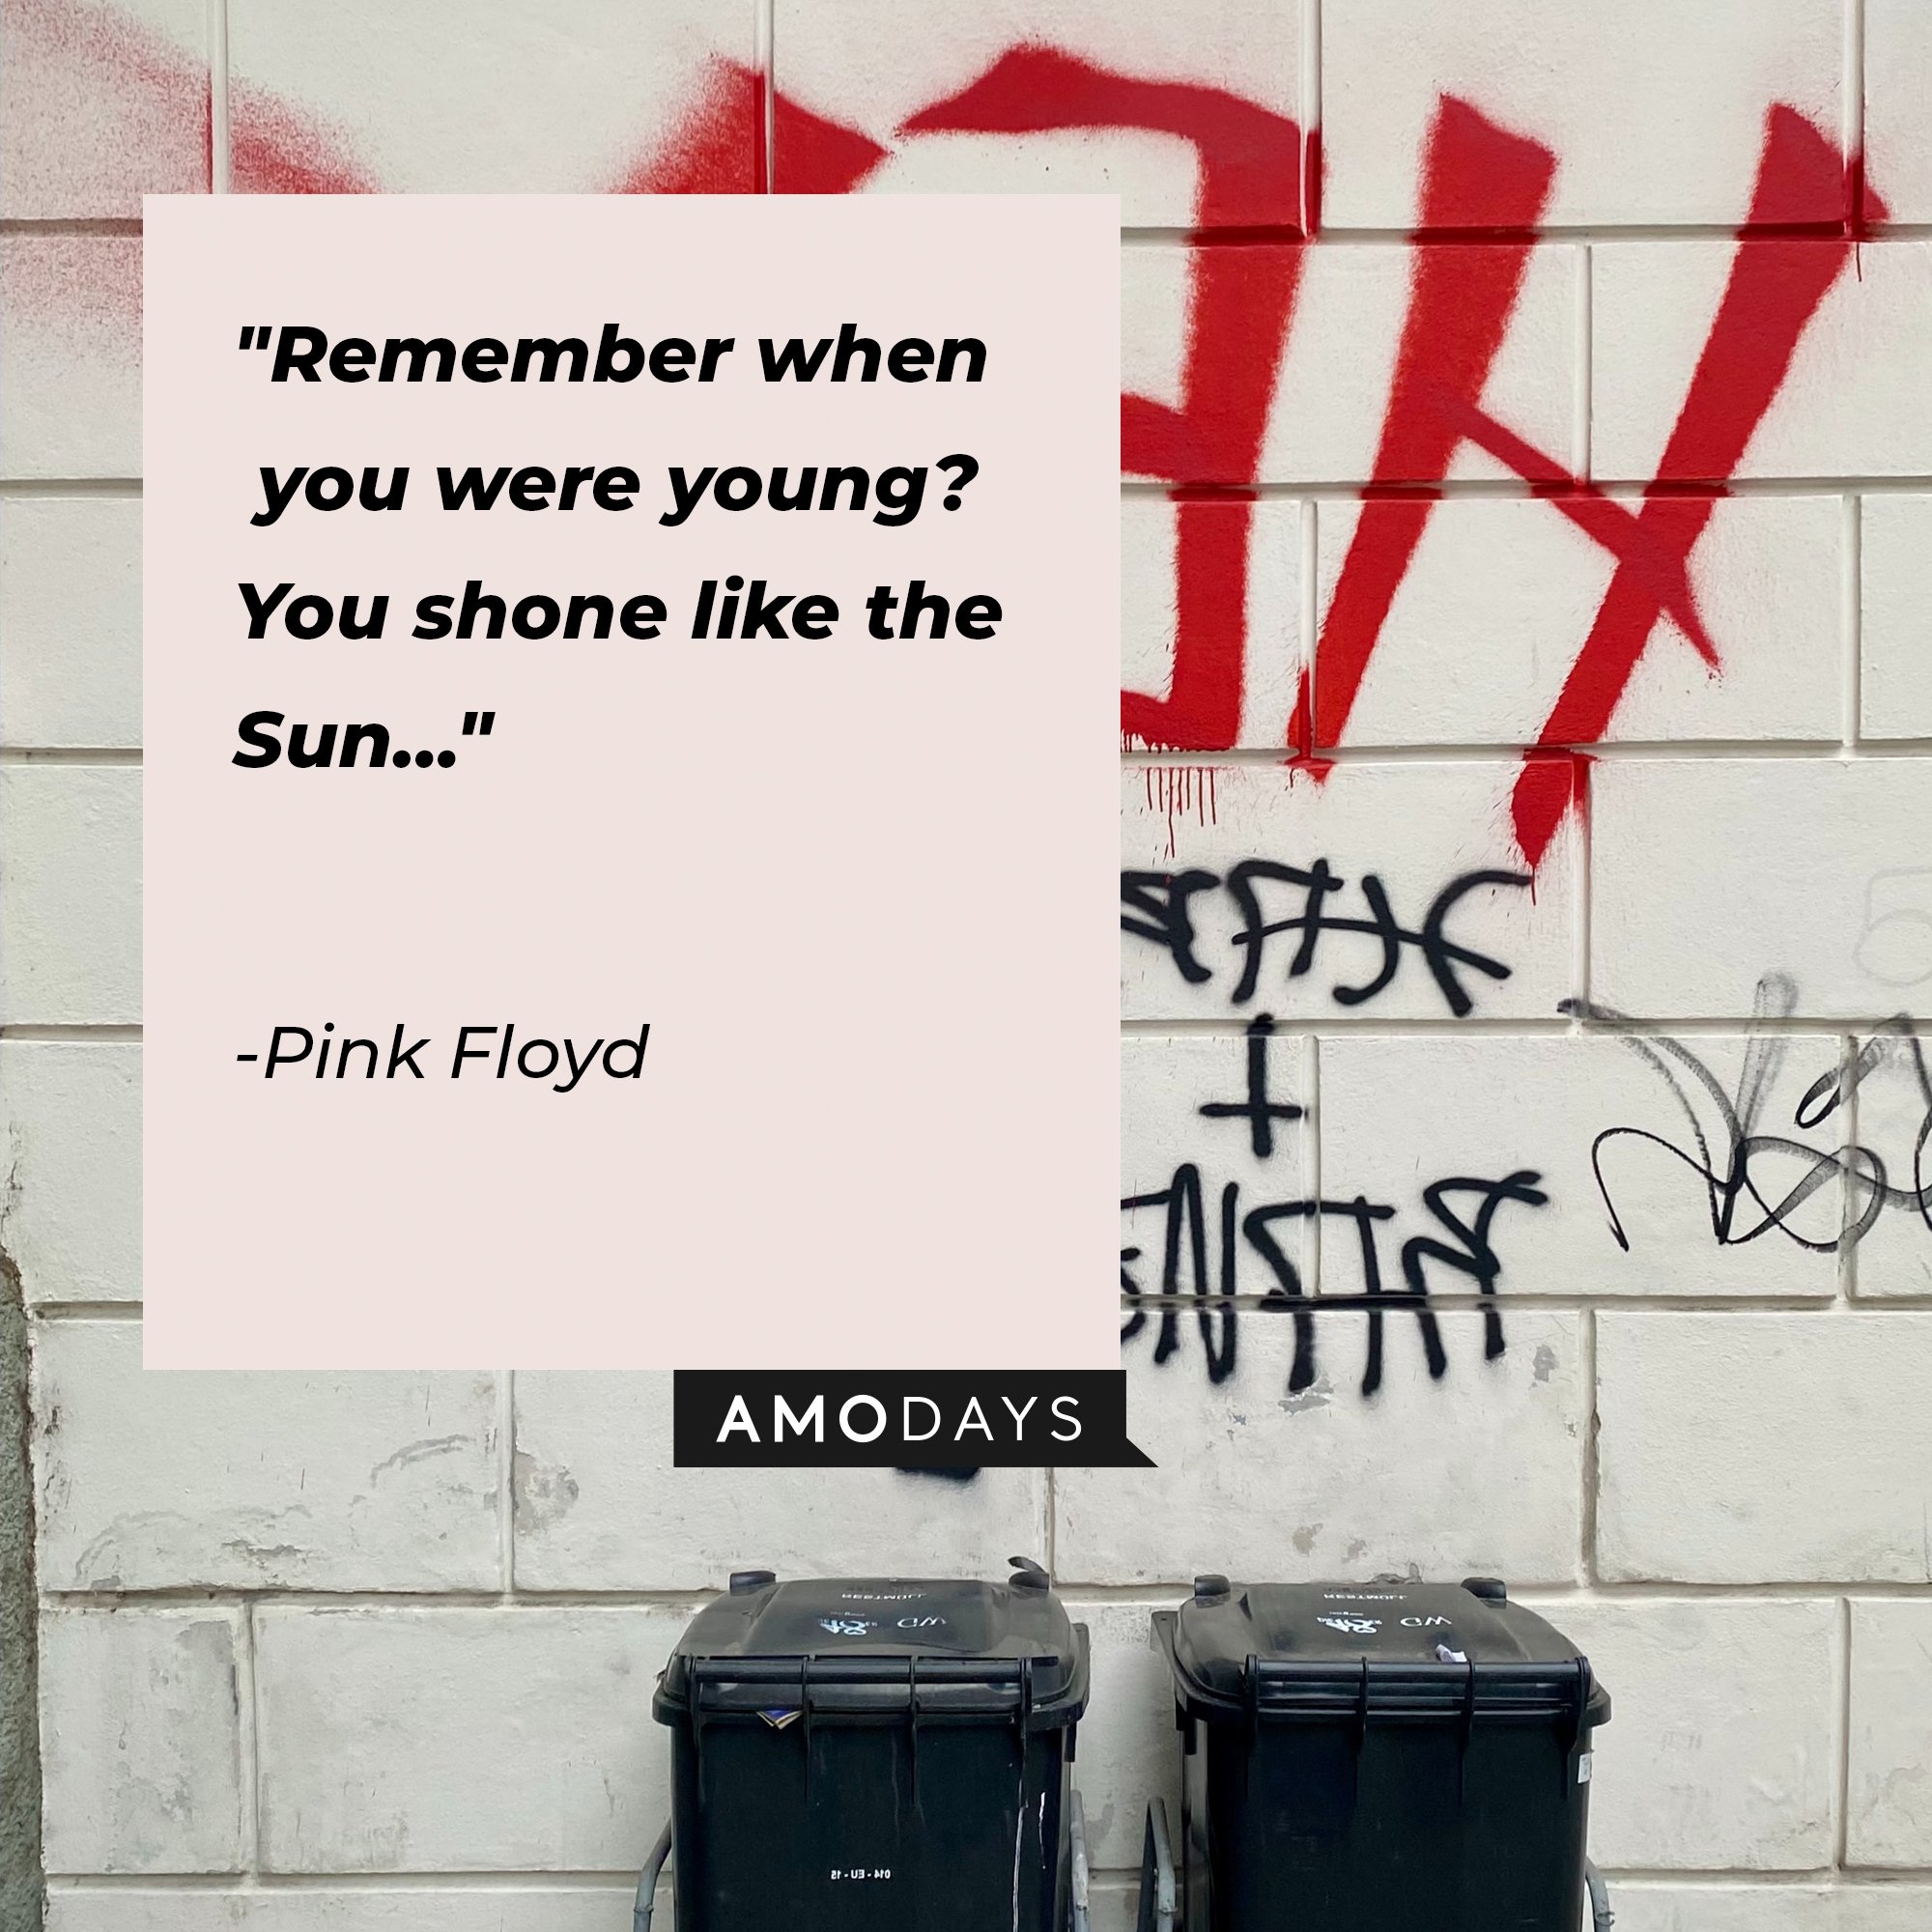 Pink Floyd's quote: "Remember when you were young? You shone like the Sun…" | Image: AmoDays